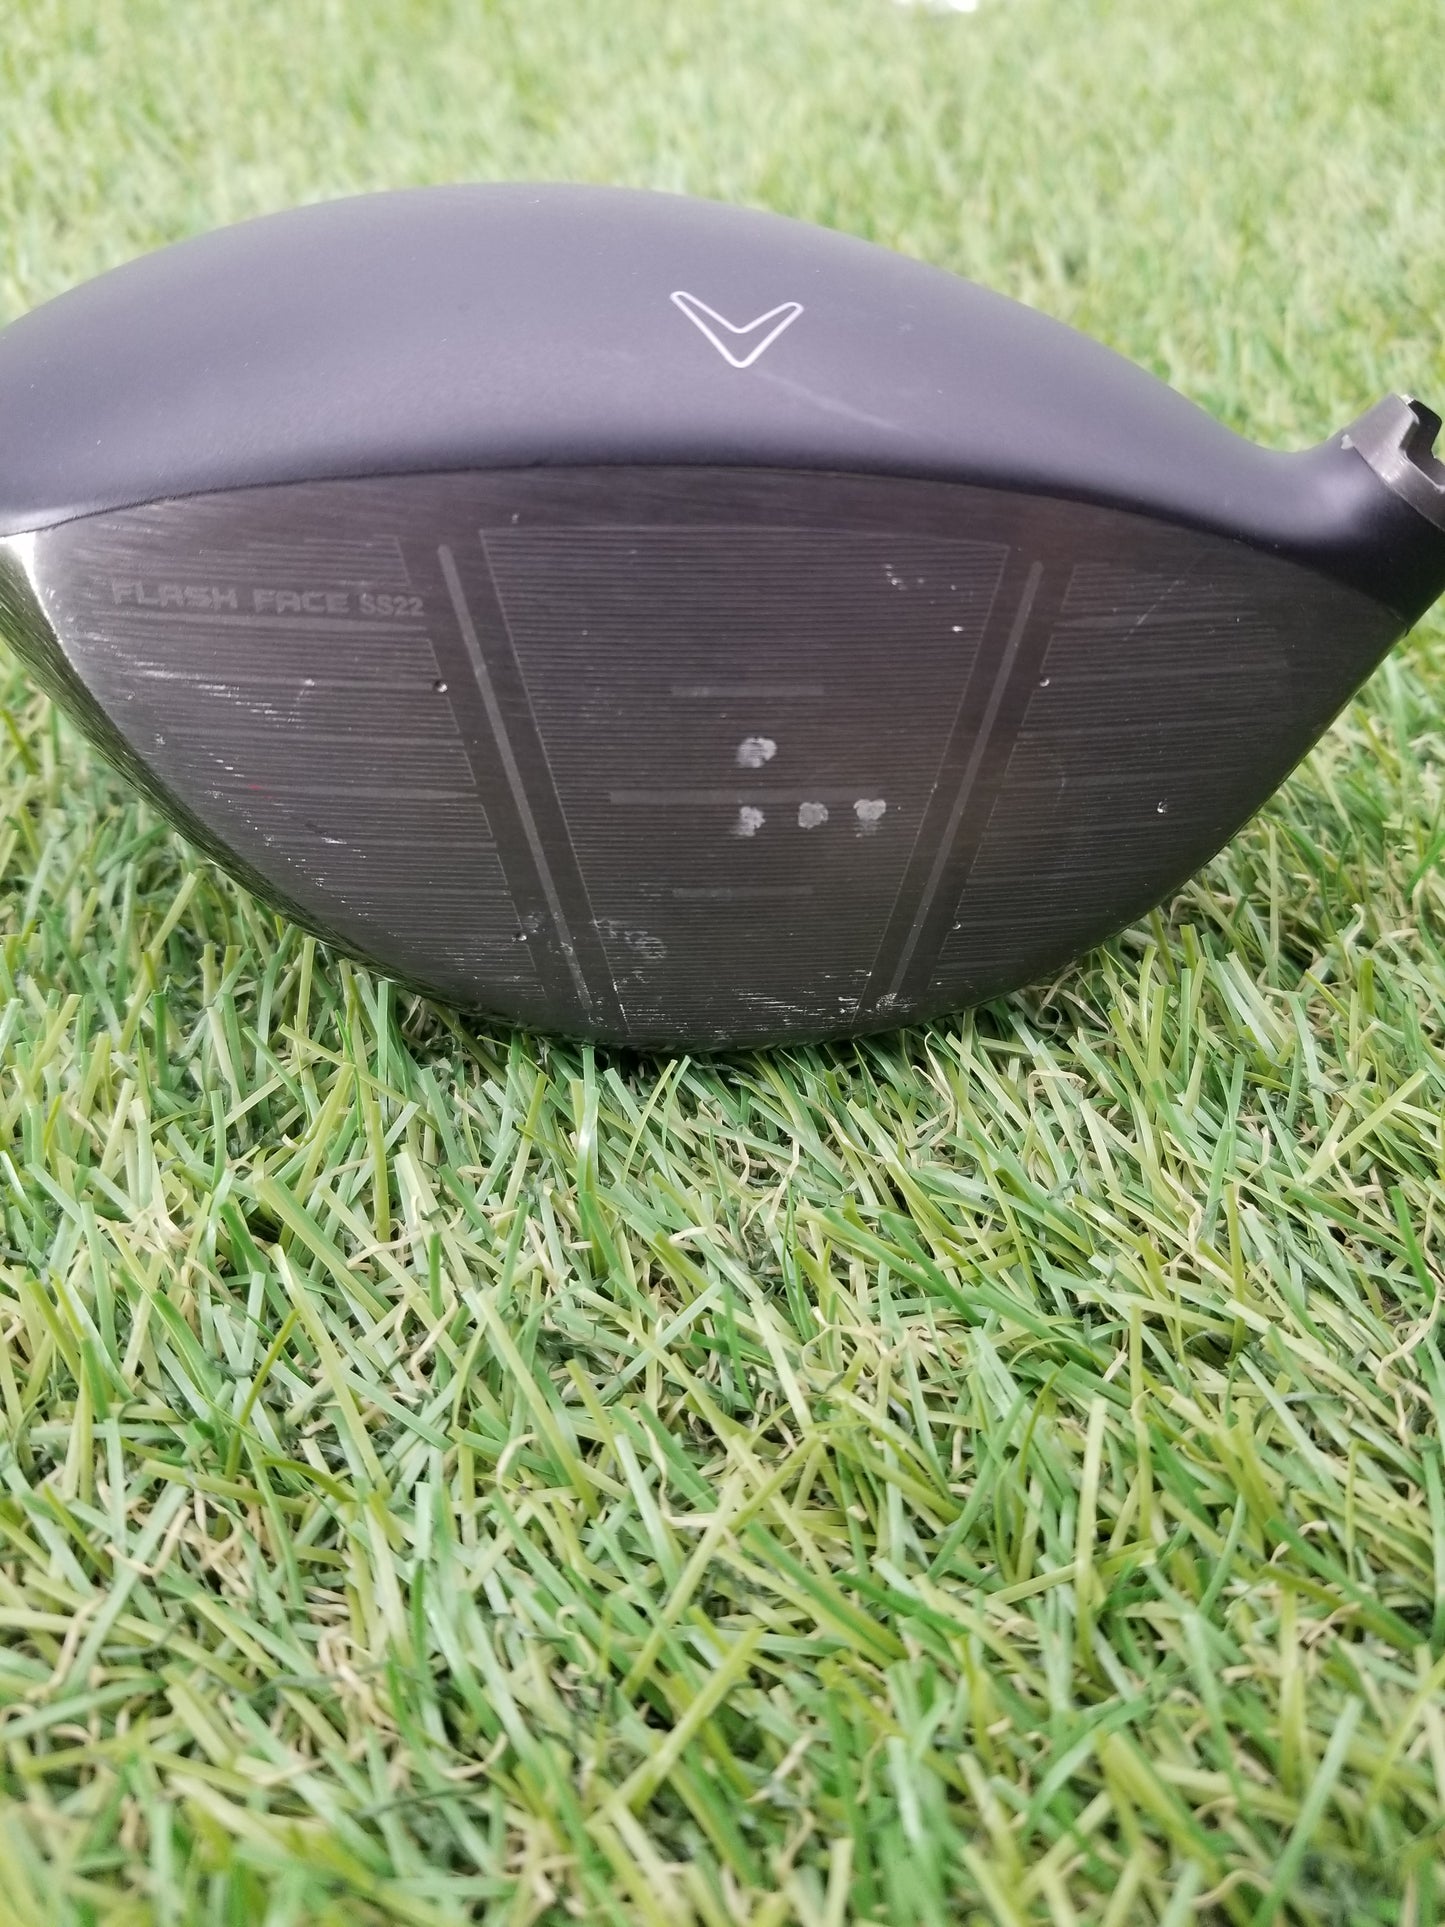 2022 CALLAWAY ROGUE ST TRIPLE DIAMOND S TOUR ISSUE DRIVER 8.5* CLUBHEAD VERYGOOD